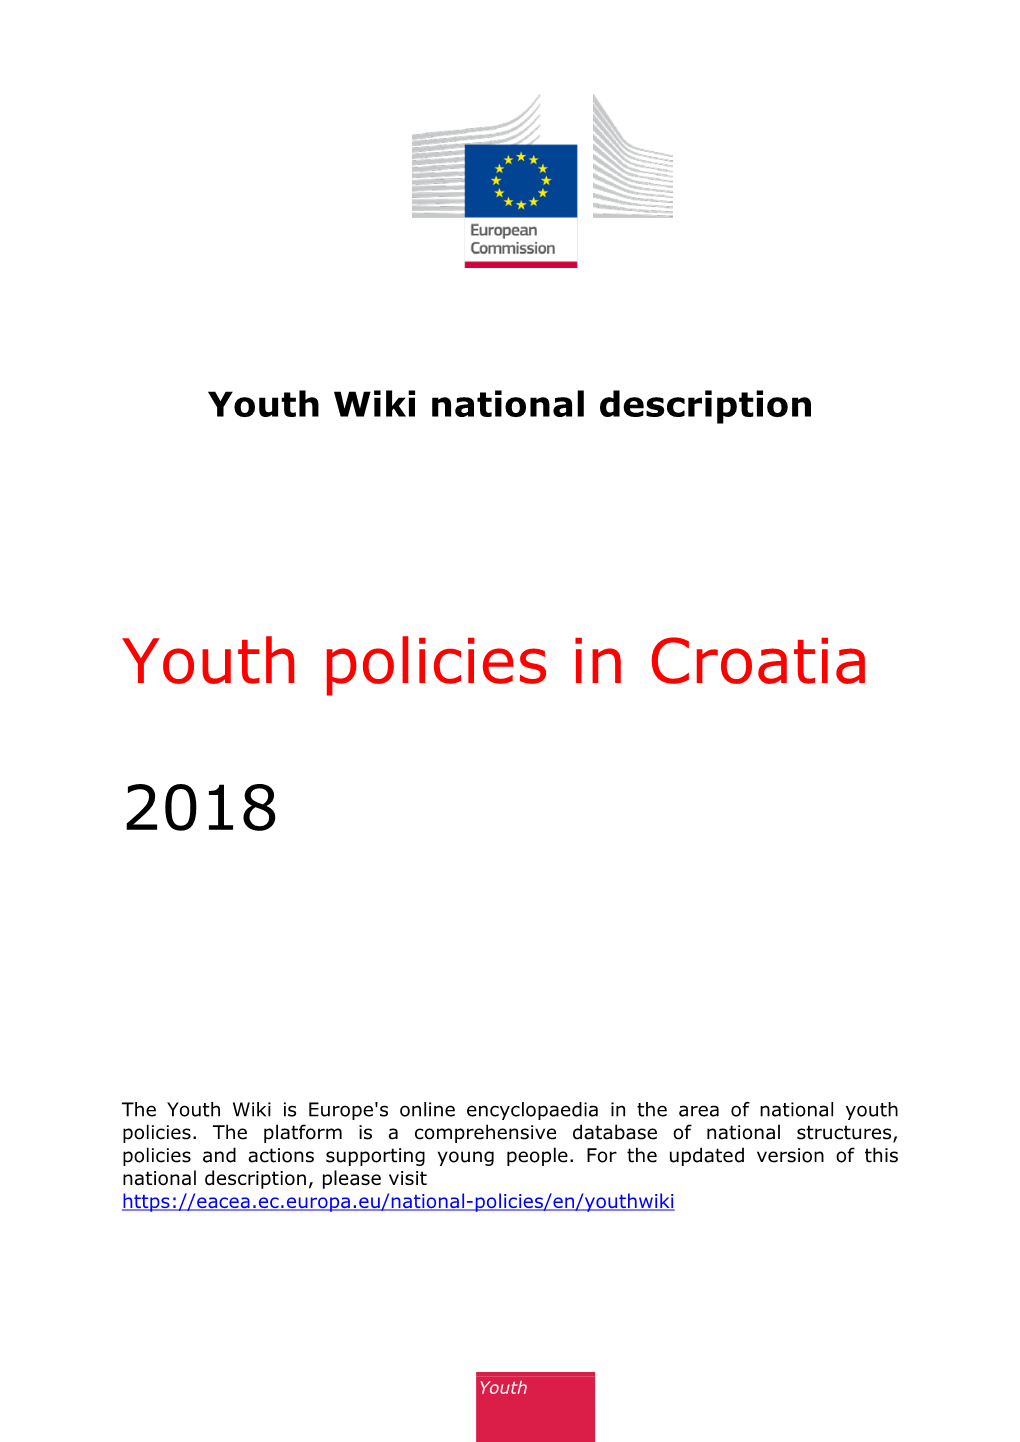 Youth Policies in Croatia